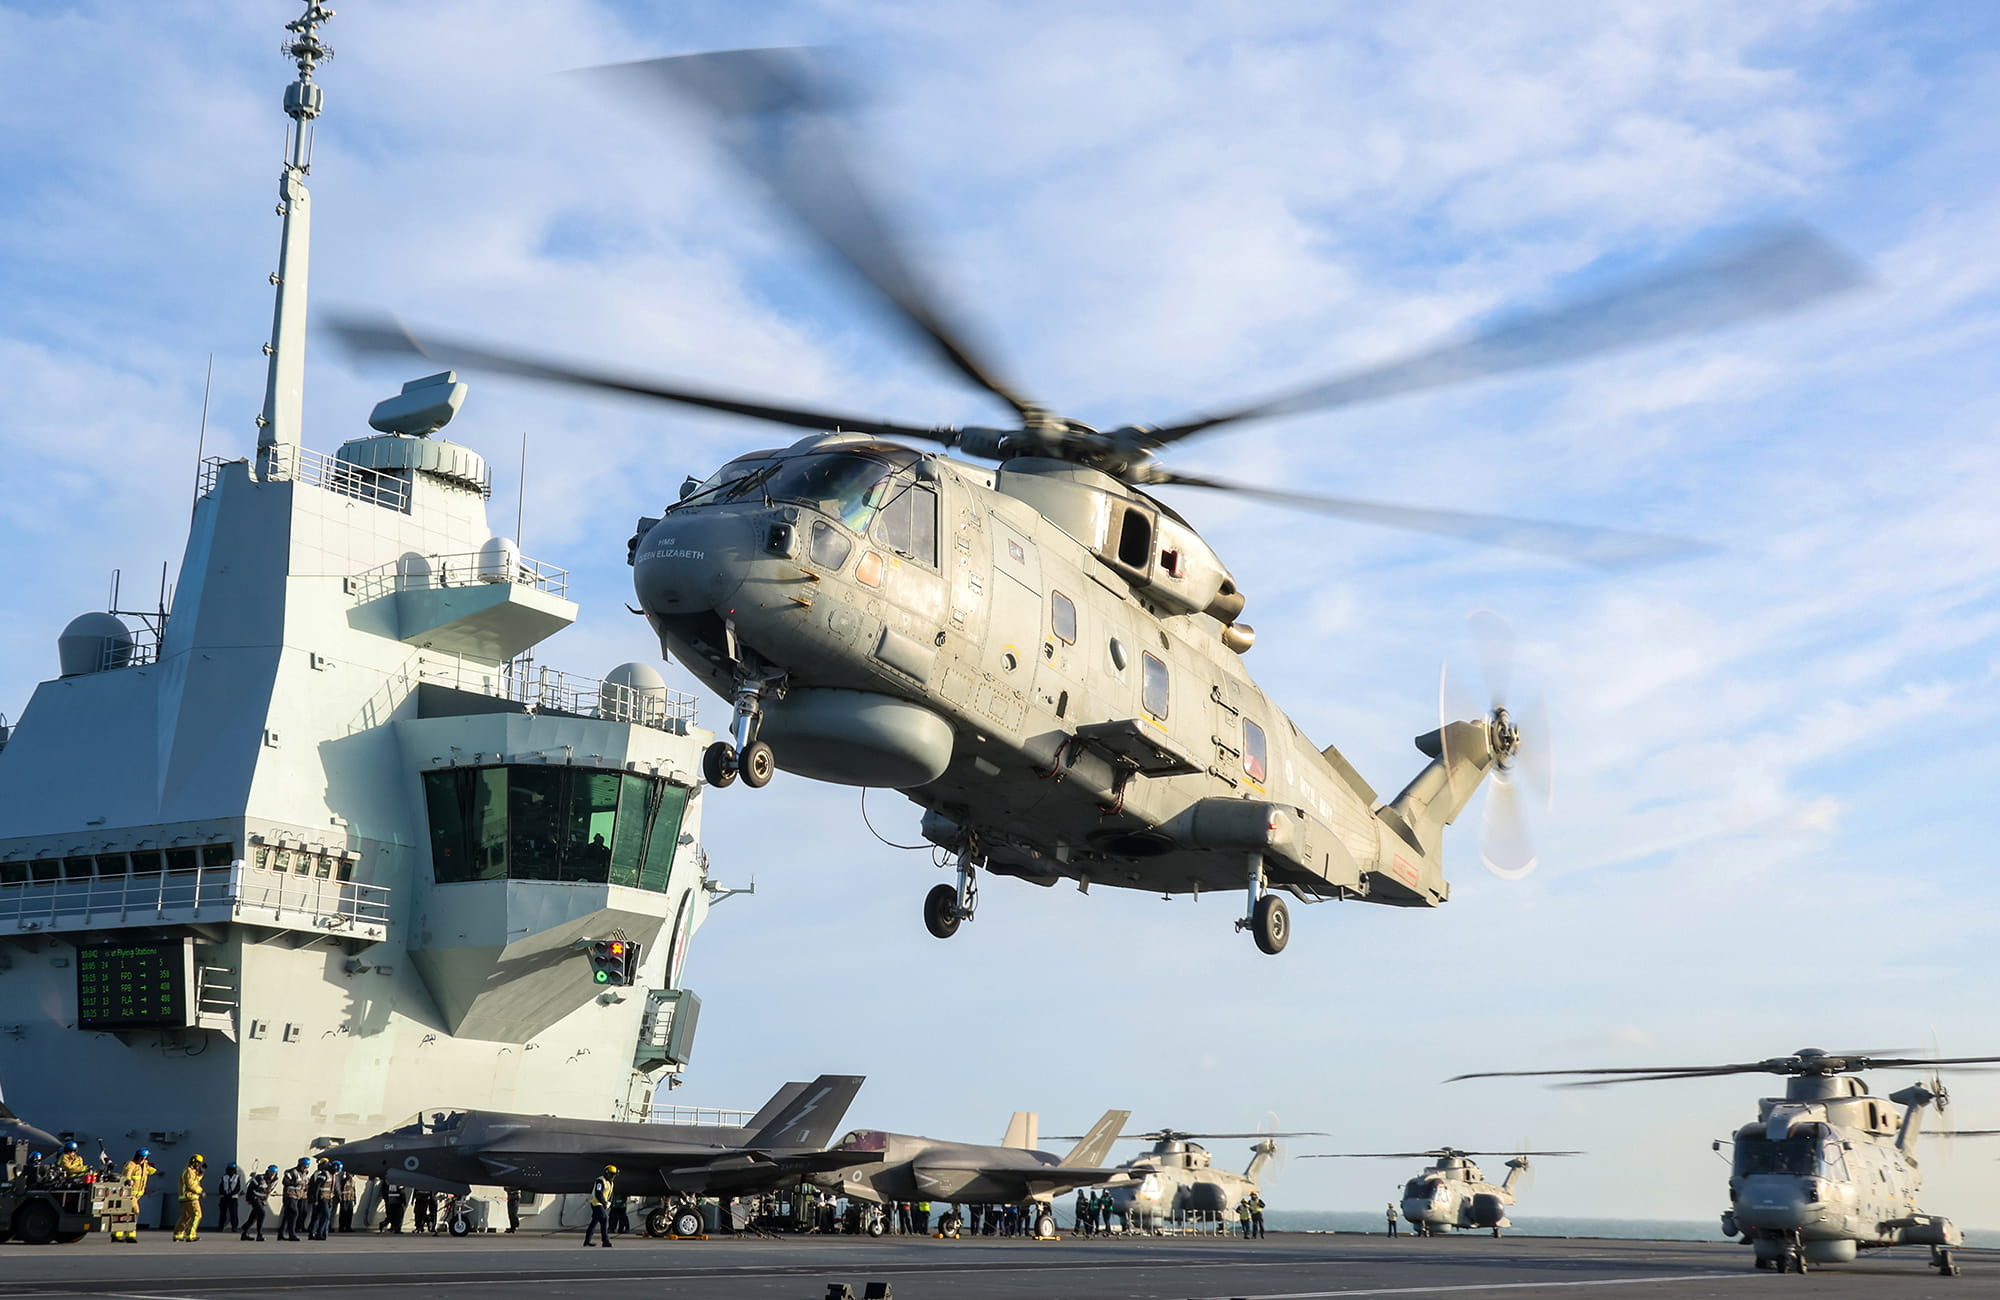 Merlin helicopter flying above the deck of an aircraft carrier